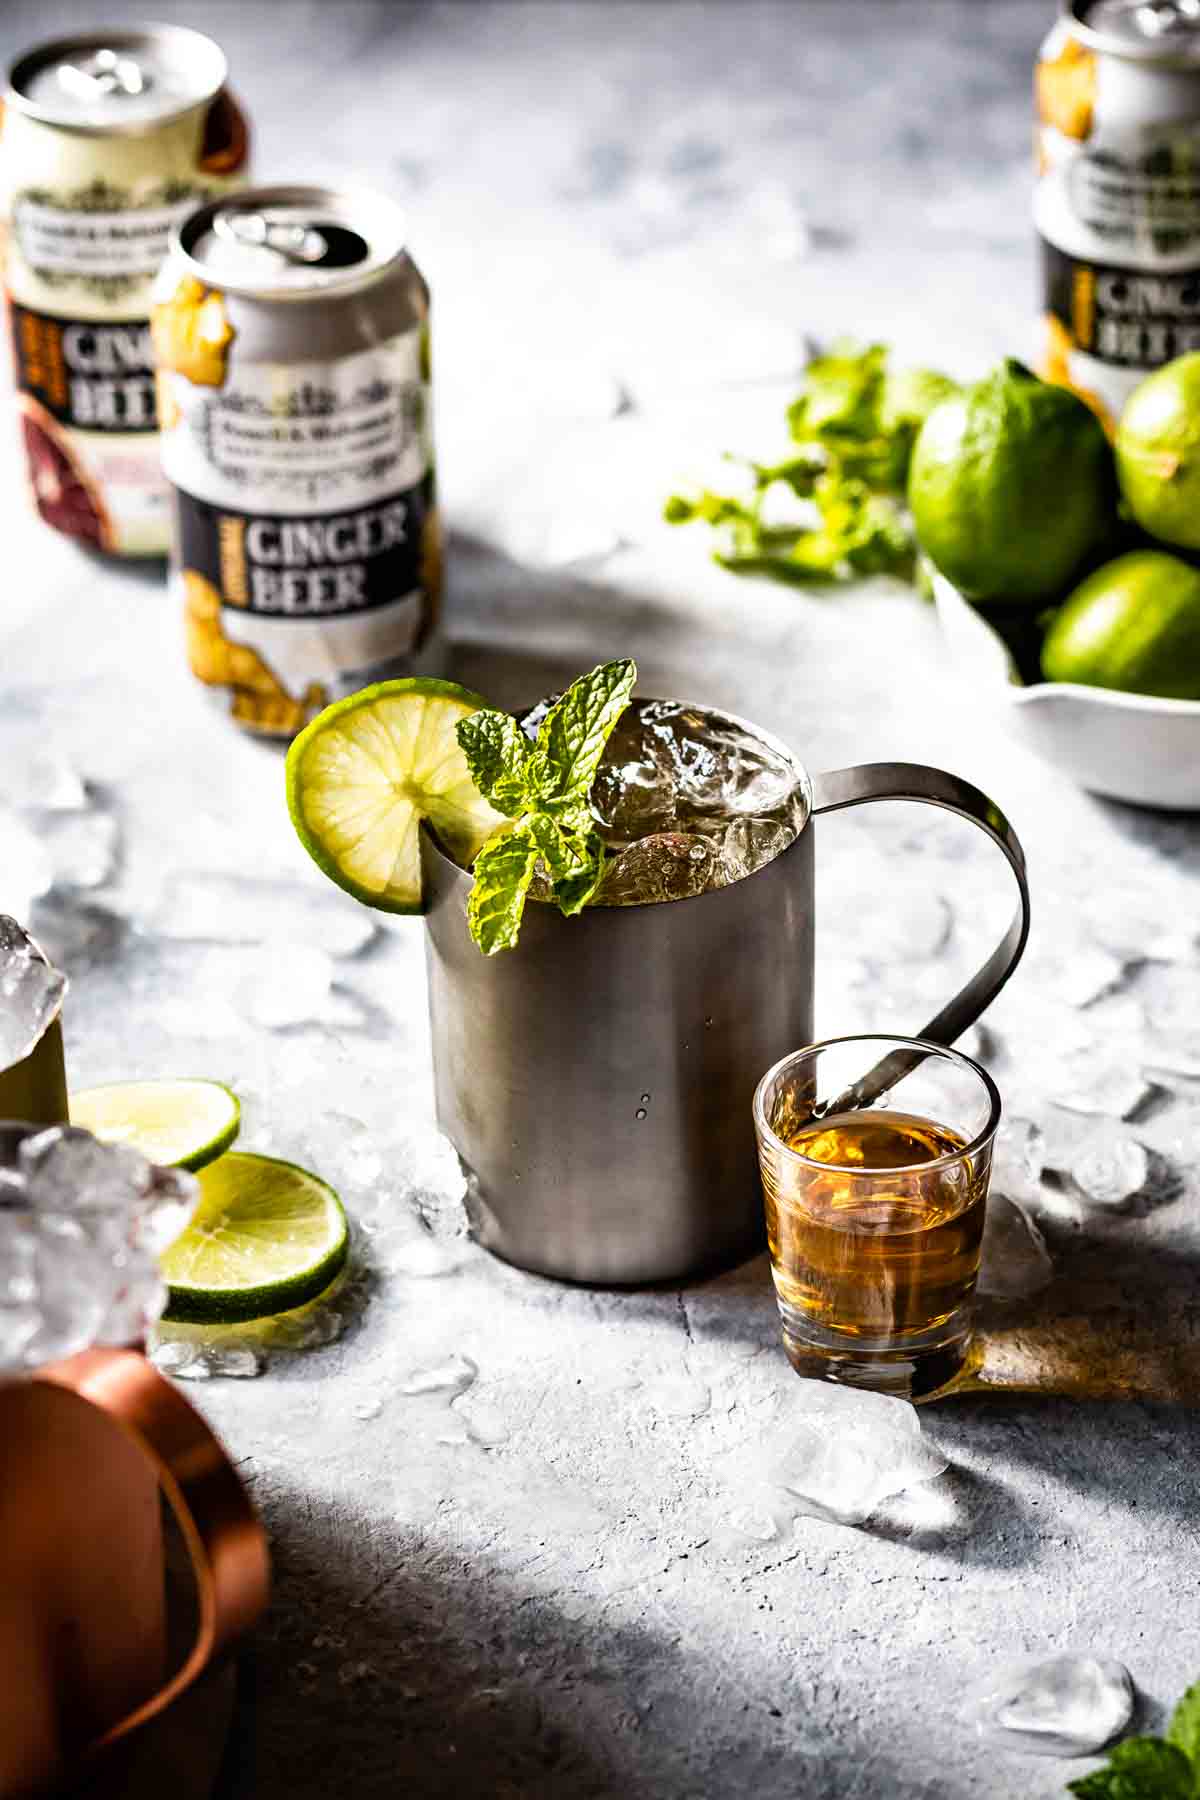 Whiskey Mule recipe photographed from the front view with ginger beer.